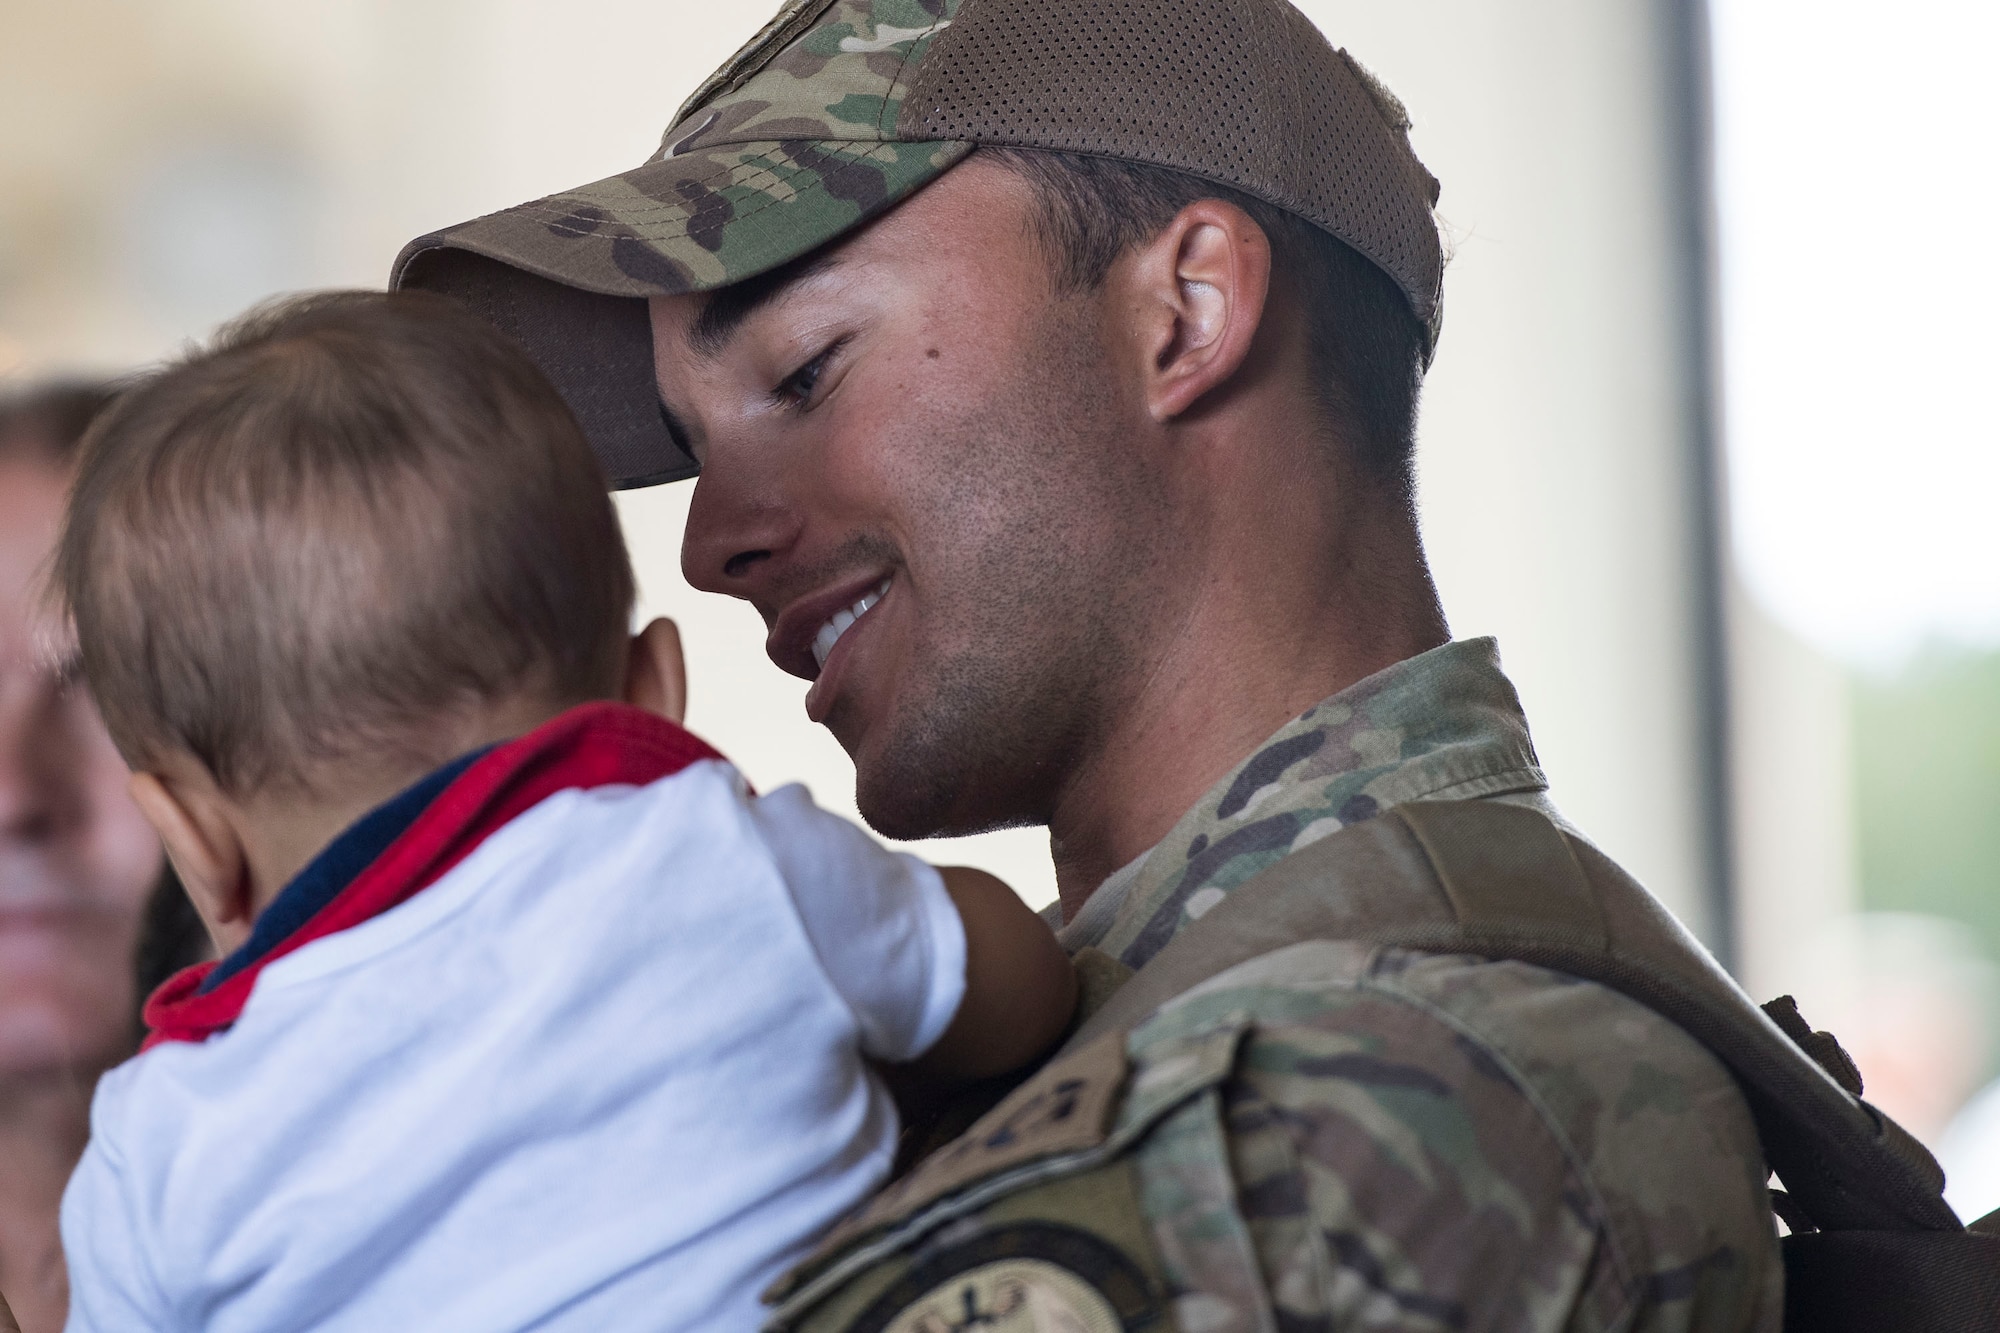 Senior Airman Brandon Boise, 823d Base Defense Squadron (BDS) fireteam member, holds his son during a redeployment, Oct. 26, 2017, at Moody Air Force Base, Ga. The 822d, 823d and 824th BDS’s provide high-risk force protection and integrated base defense for expeditionary air forces. Airmen from the 823d BDS just returned home from conducting relief-in-place in the United States Africa Command theater while Airmen from the 824th BDS took their place. (U.S. Air Force photo by Senior Airman Janiqua P. Robinson)